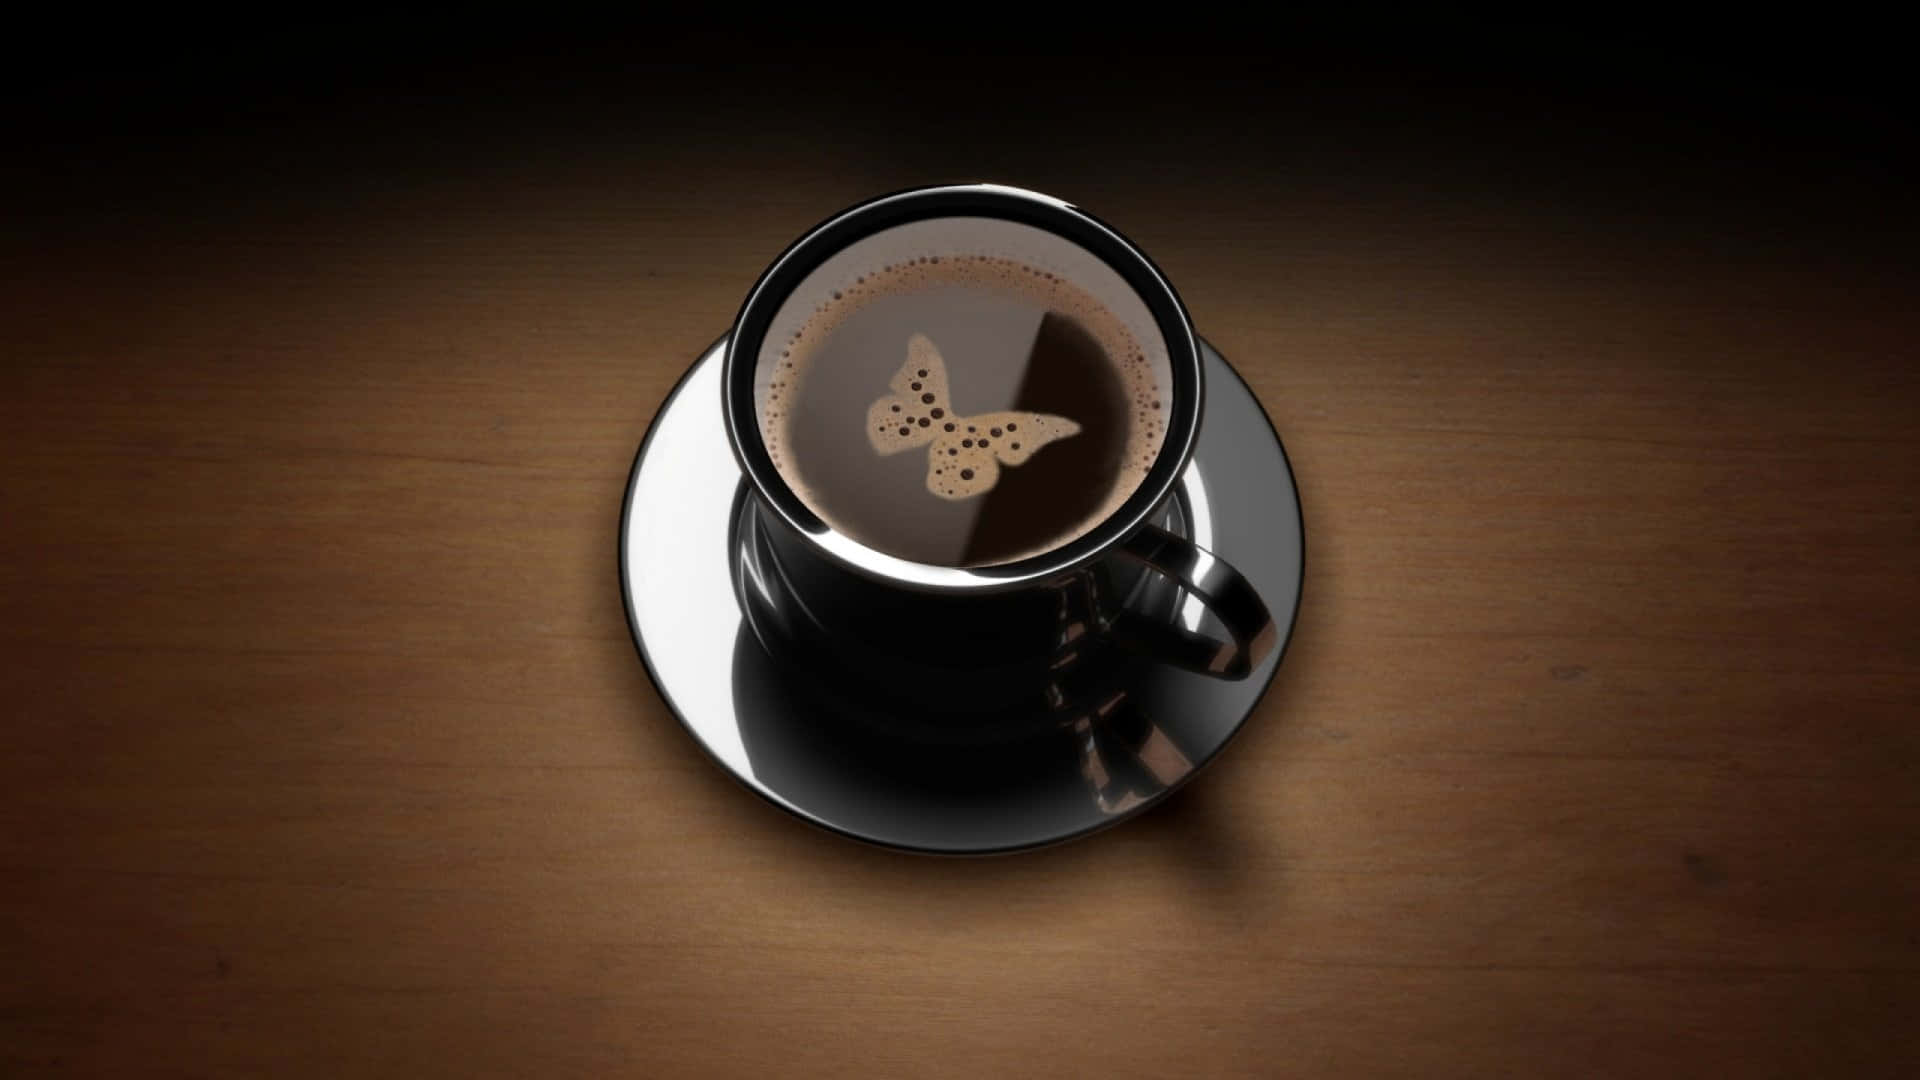 "Deliciously brewed black coffee - the perfect way to kickstart your day!" Wallpaper